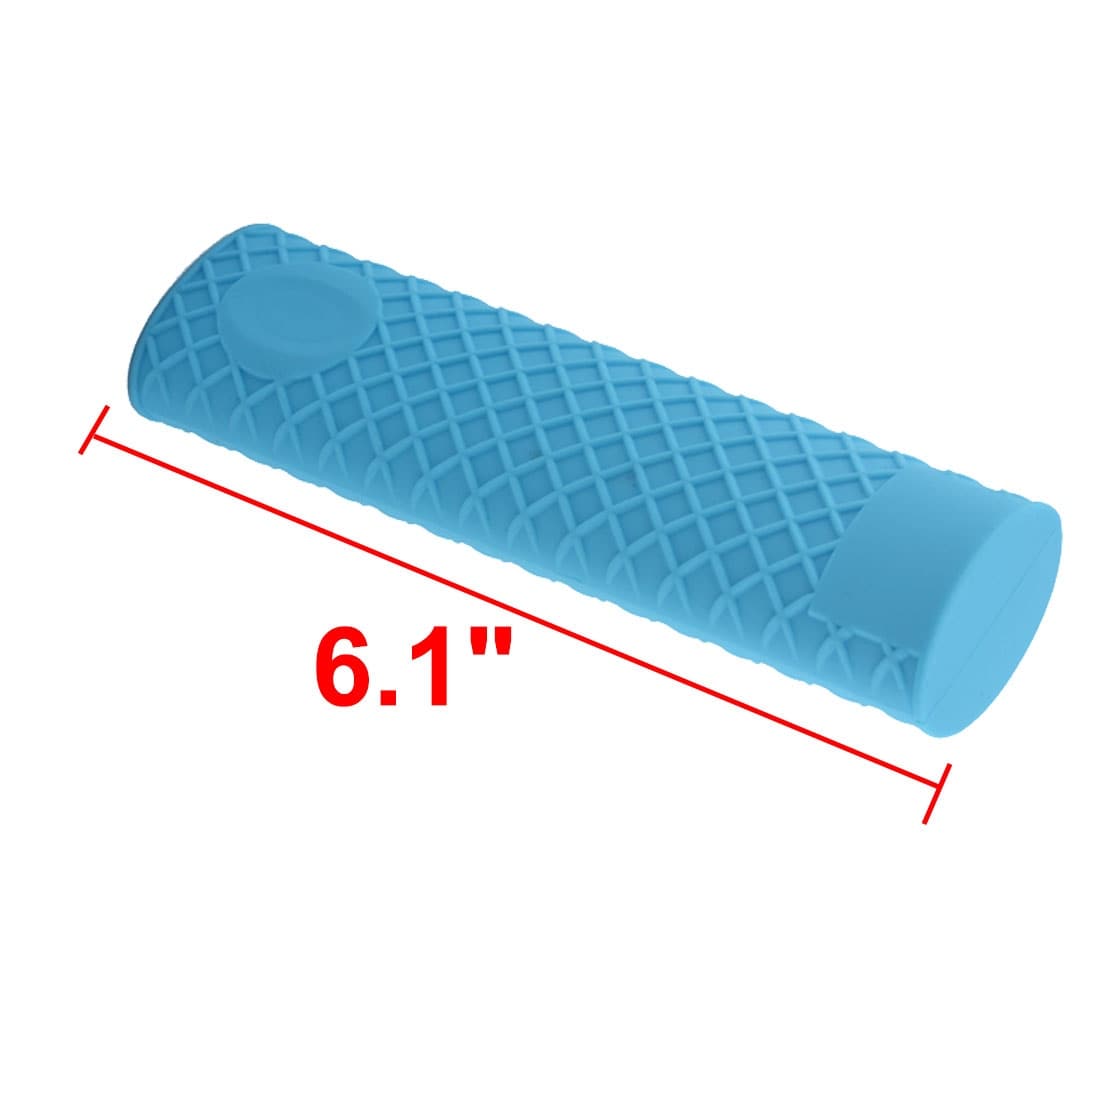 Silicone Pot Handle Holder Cover Heat Resistant Sleeve Grips